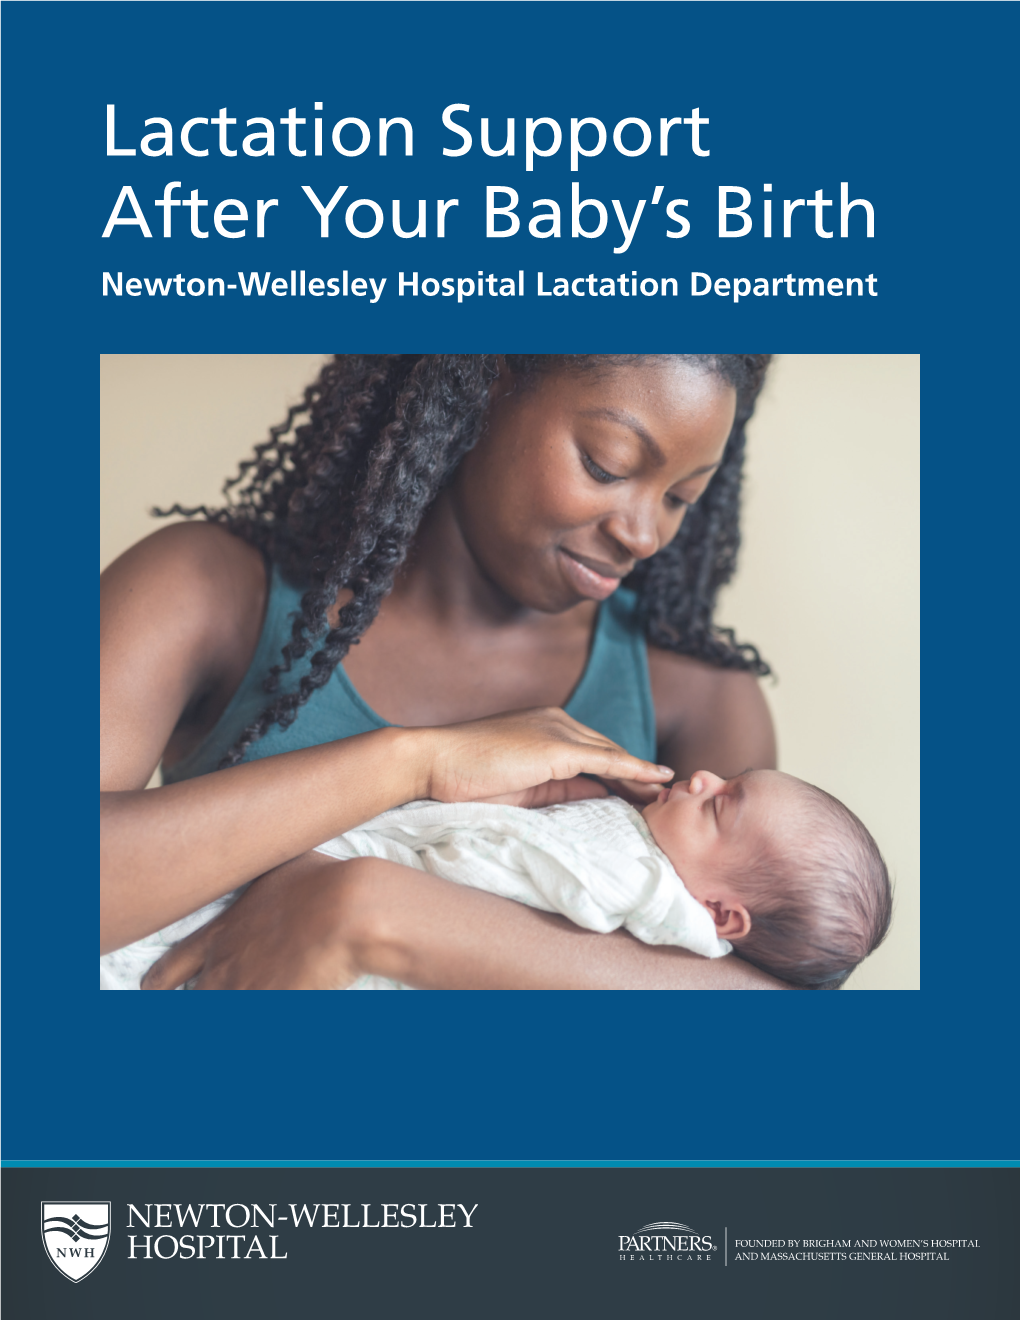 Lactation Support After Your Baby's Birth